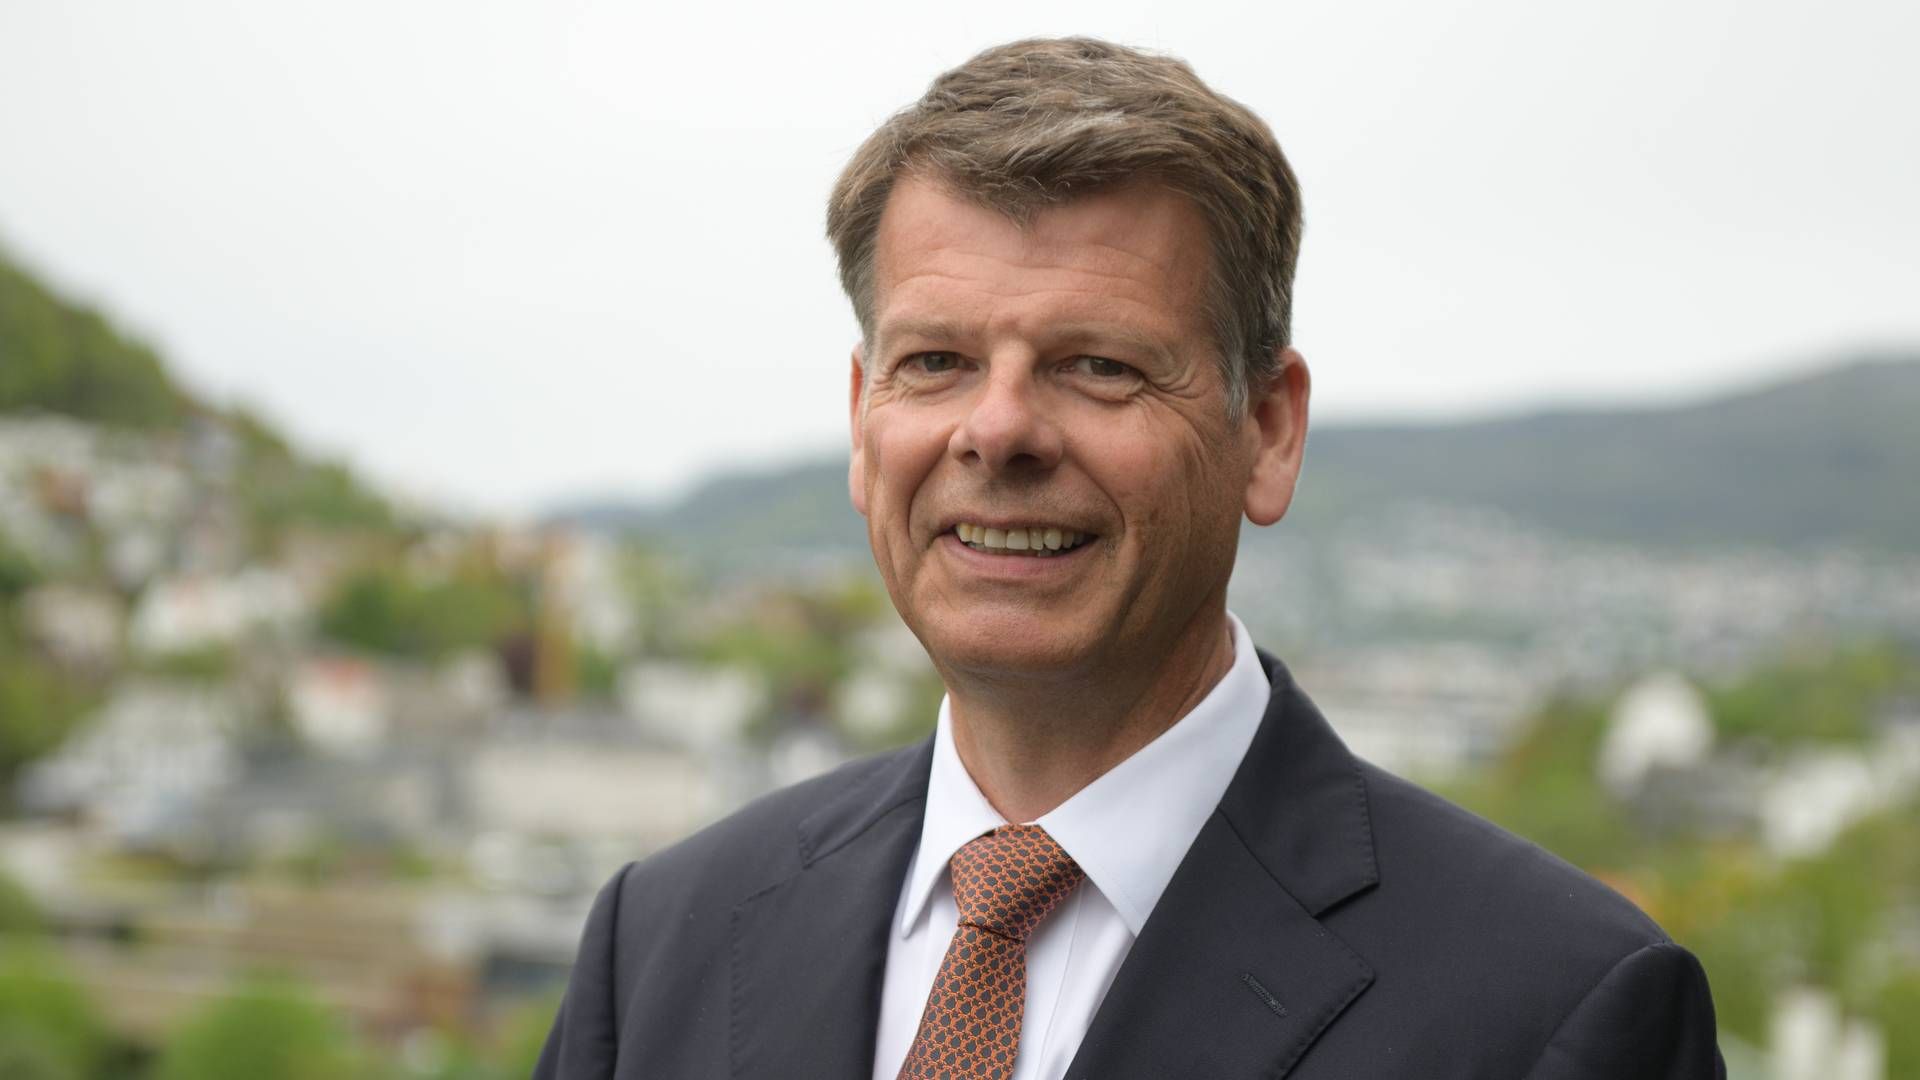 "The development of new engines that can run on alternative fuels is still a long way from being in proper supply," says Harald Fotland, CEO of Odfjell. | Photo: Gunnar Eide / Odfjell